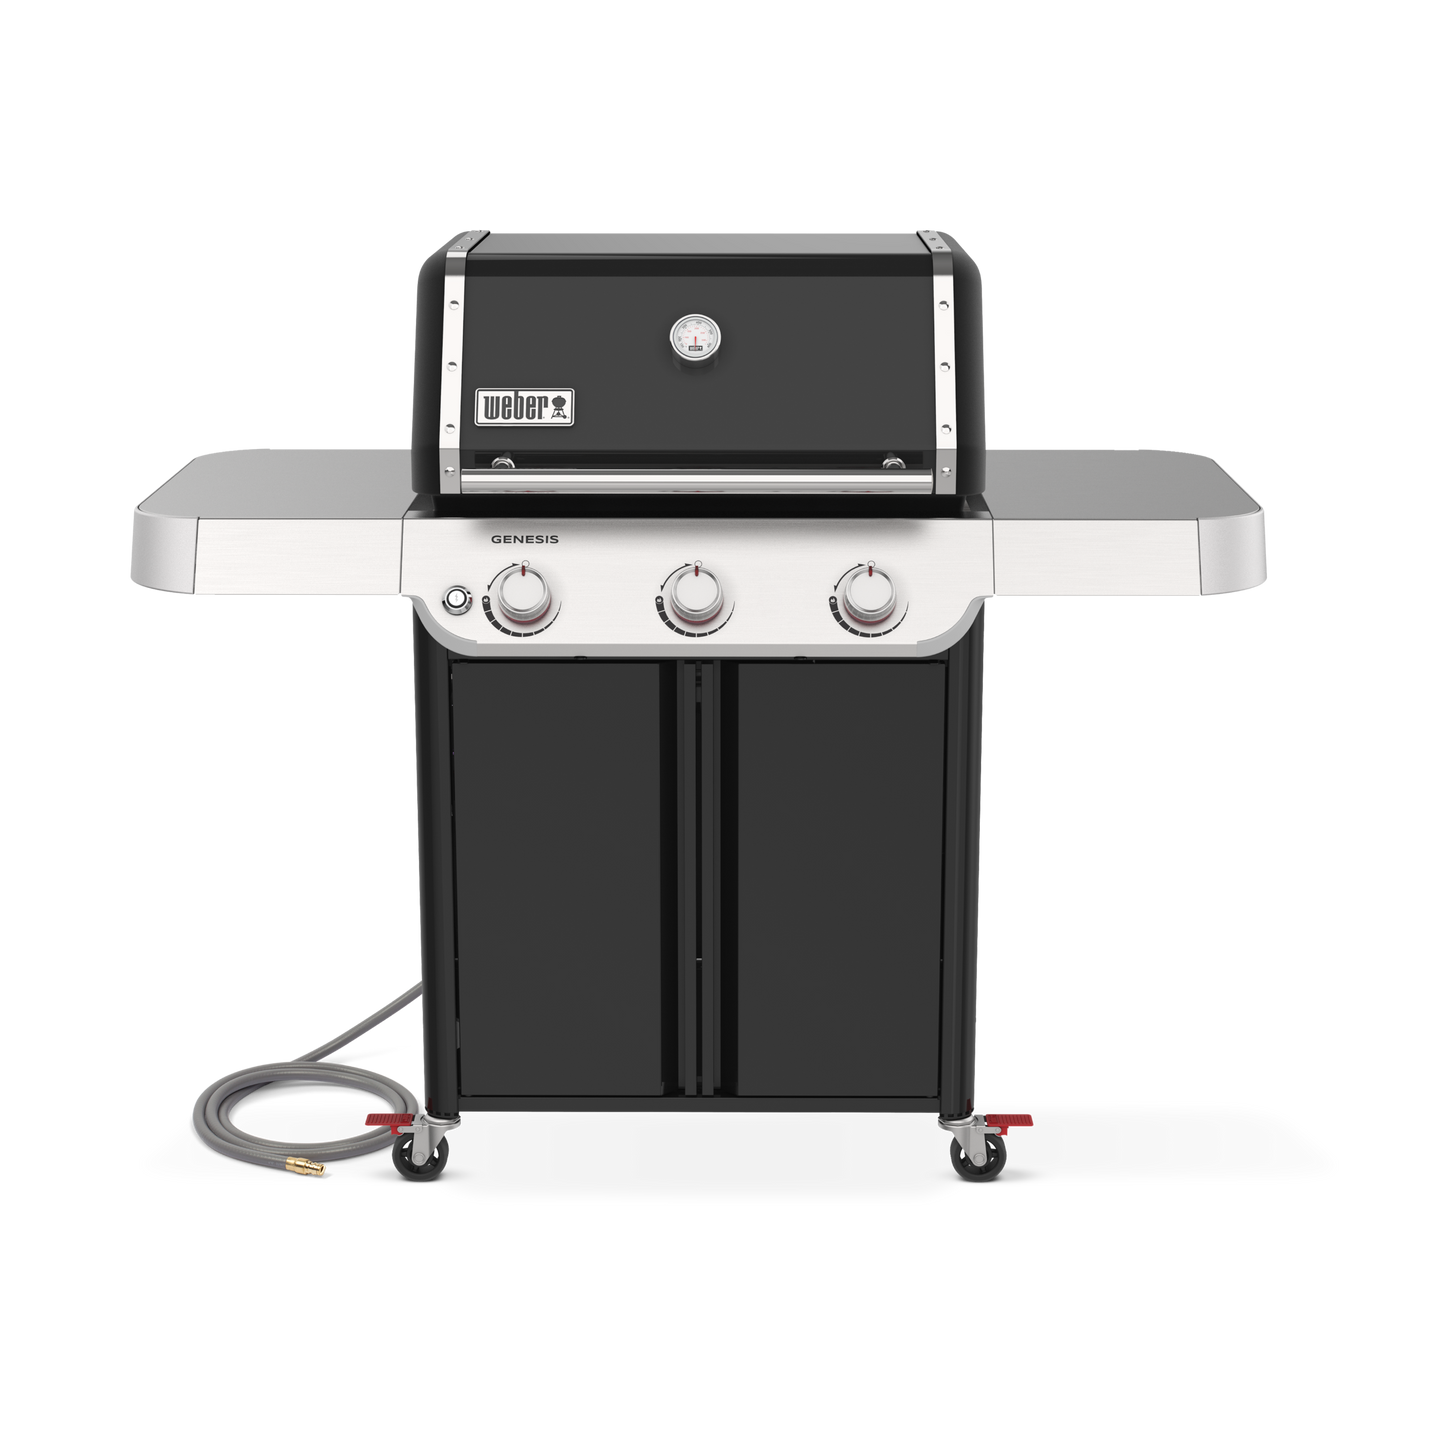 Weber Genesis E-315 BBQ with Cast Iron Grill Grates